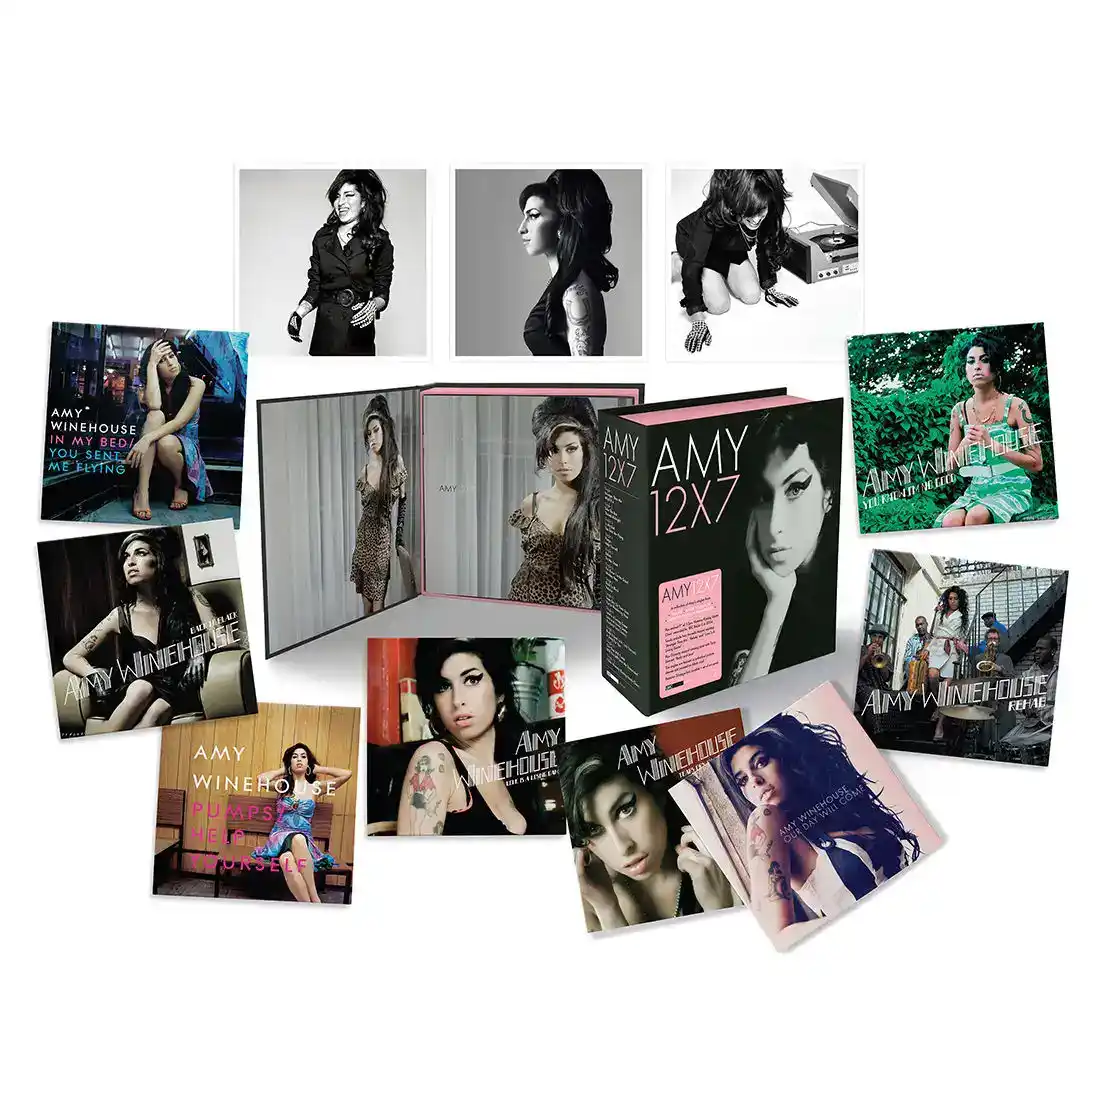 AMY WINEHOUSE / 12X7: THE SINGLES COLLECTION